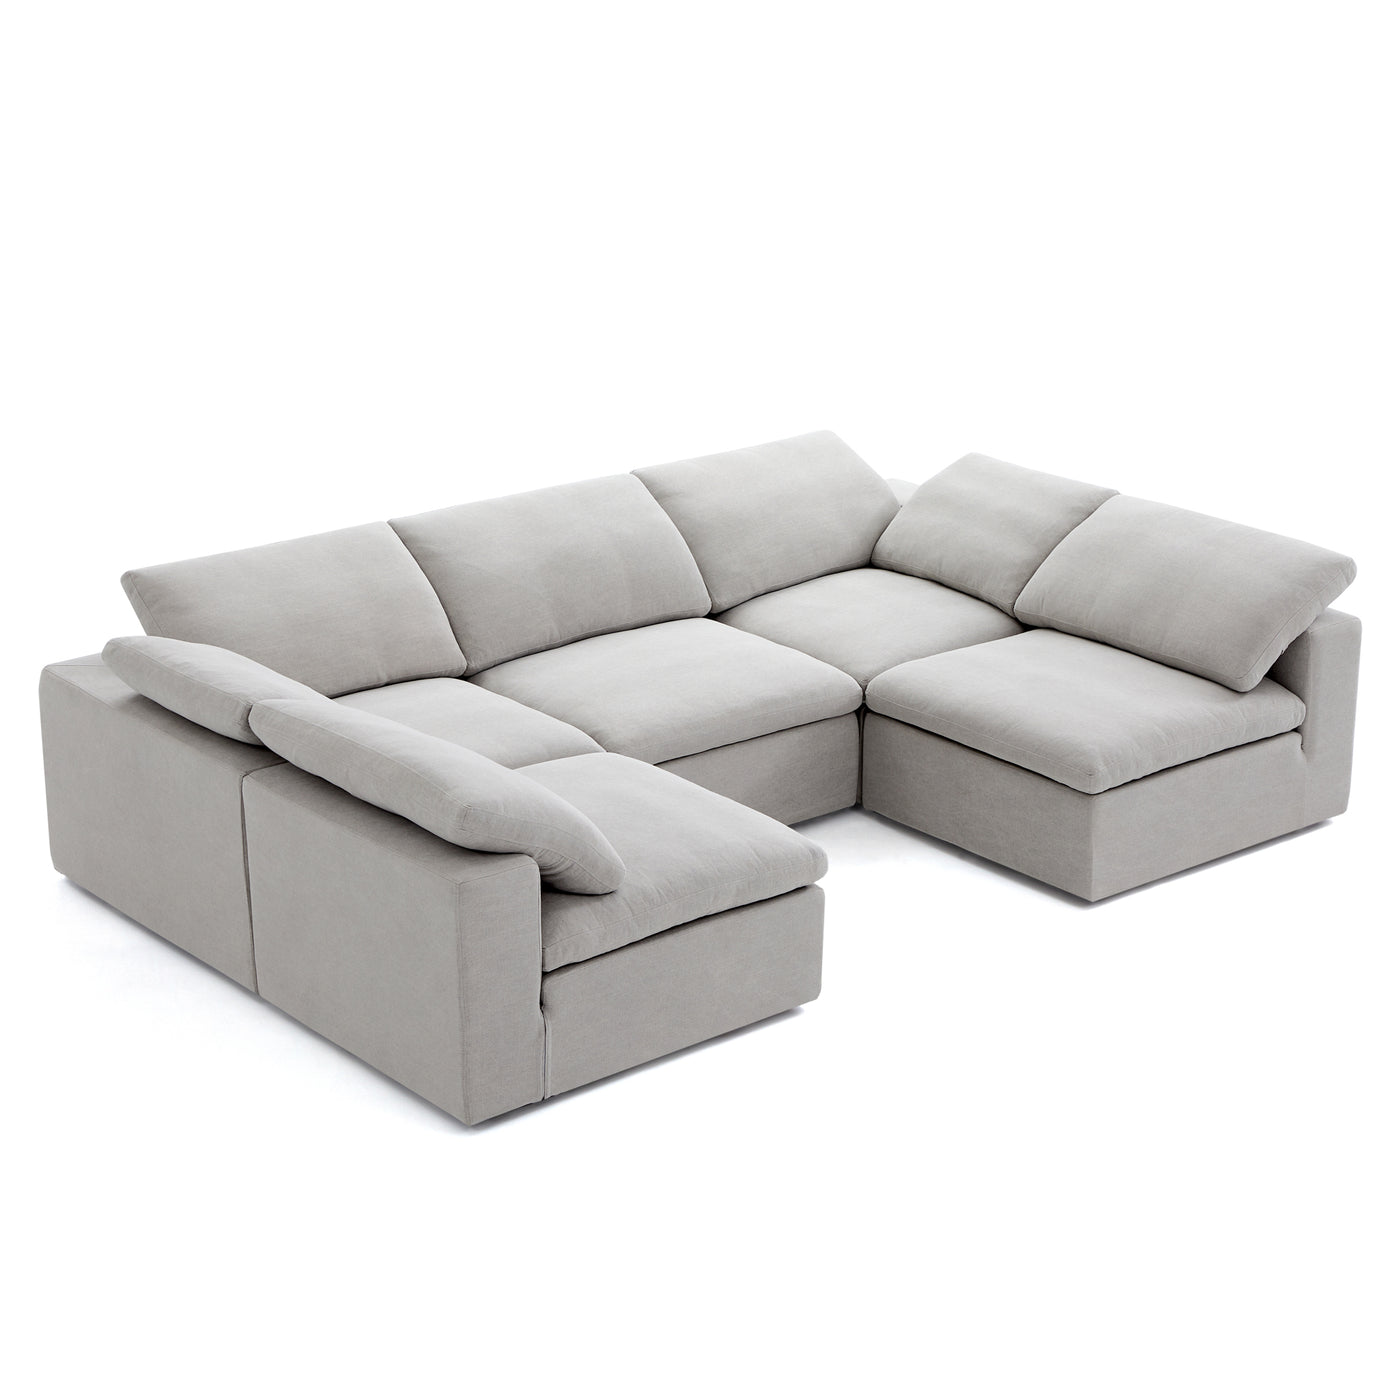 Tender Wabi Sabi Sand U Shaped Sectional with Open Ends-Light Gray-128.0"